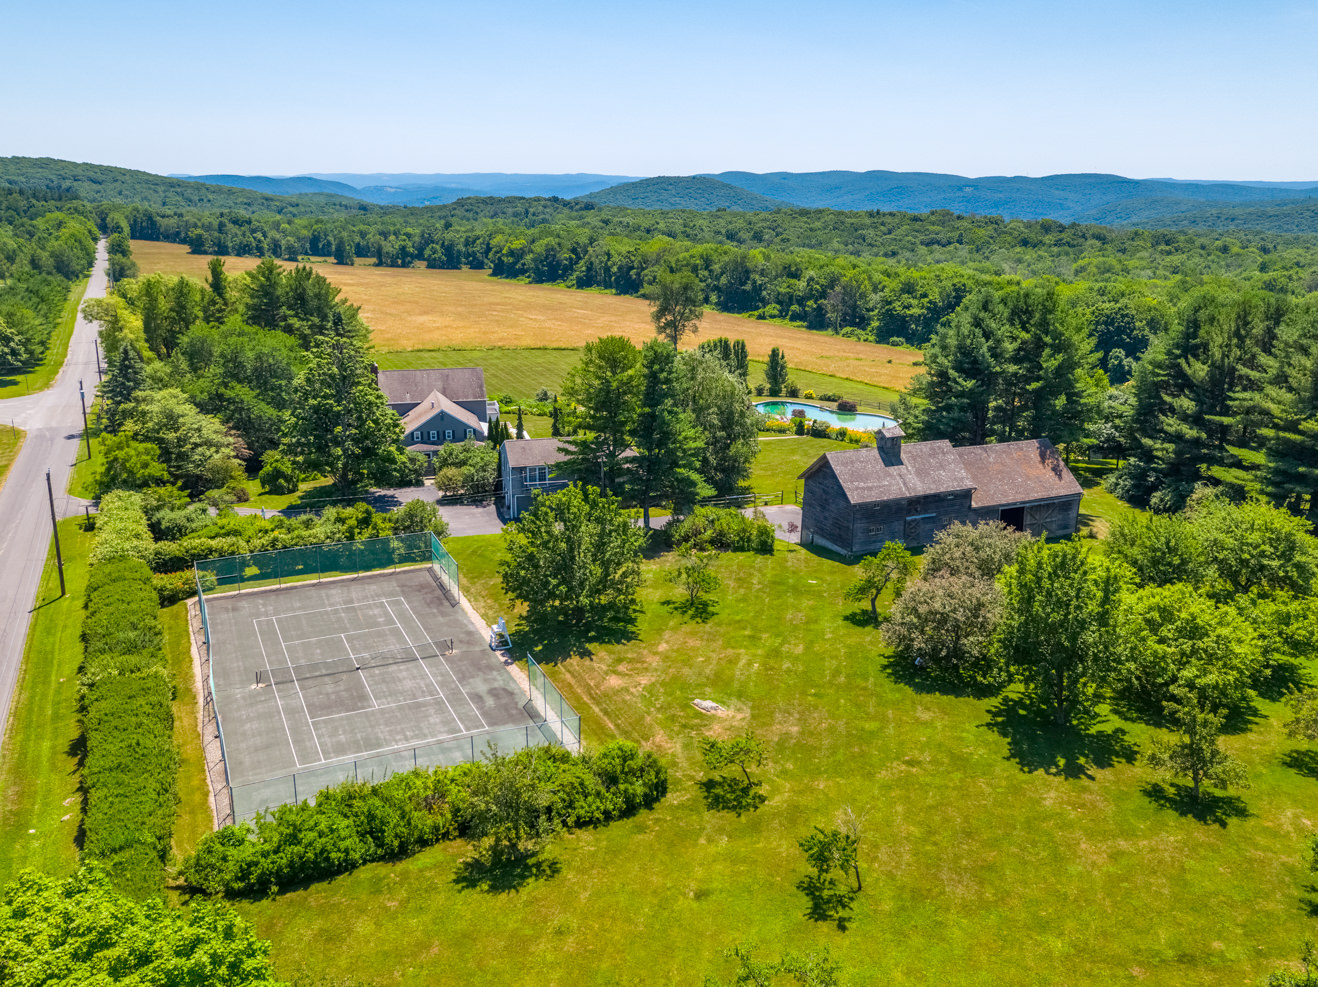 Real Estate drone photography in Connecticut, Massachusetts, New York. Photoflight Aerial Media